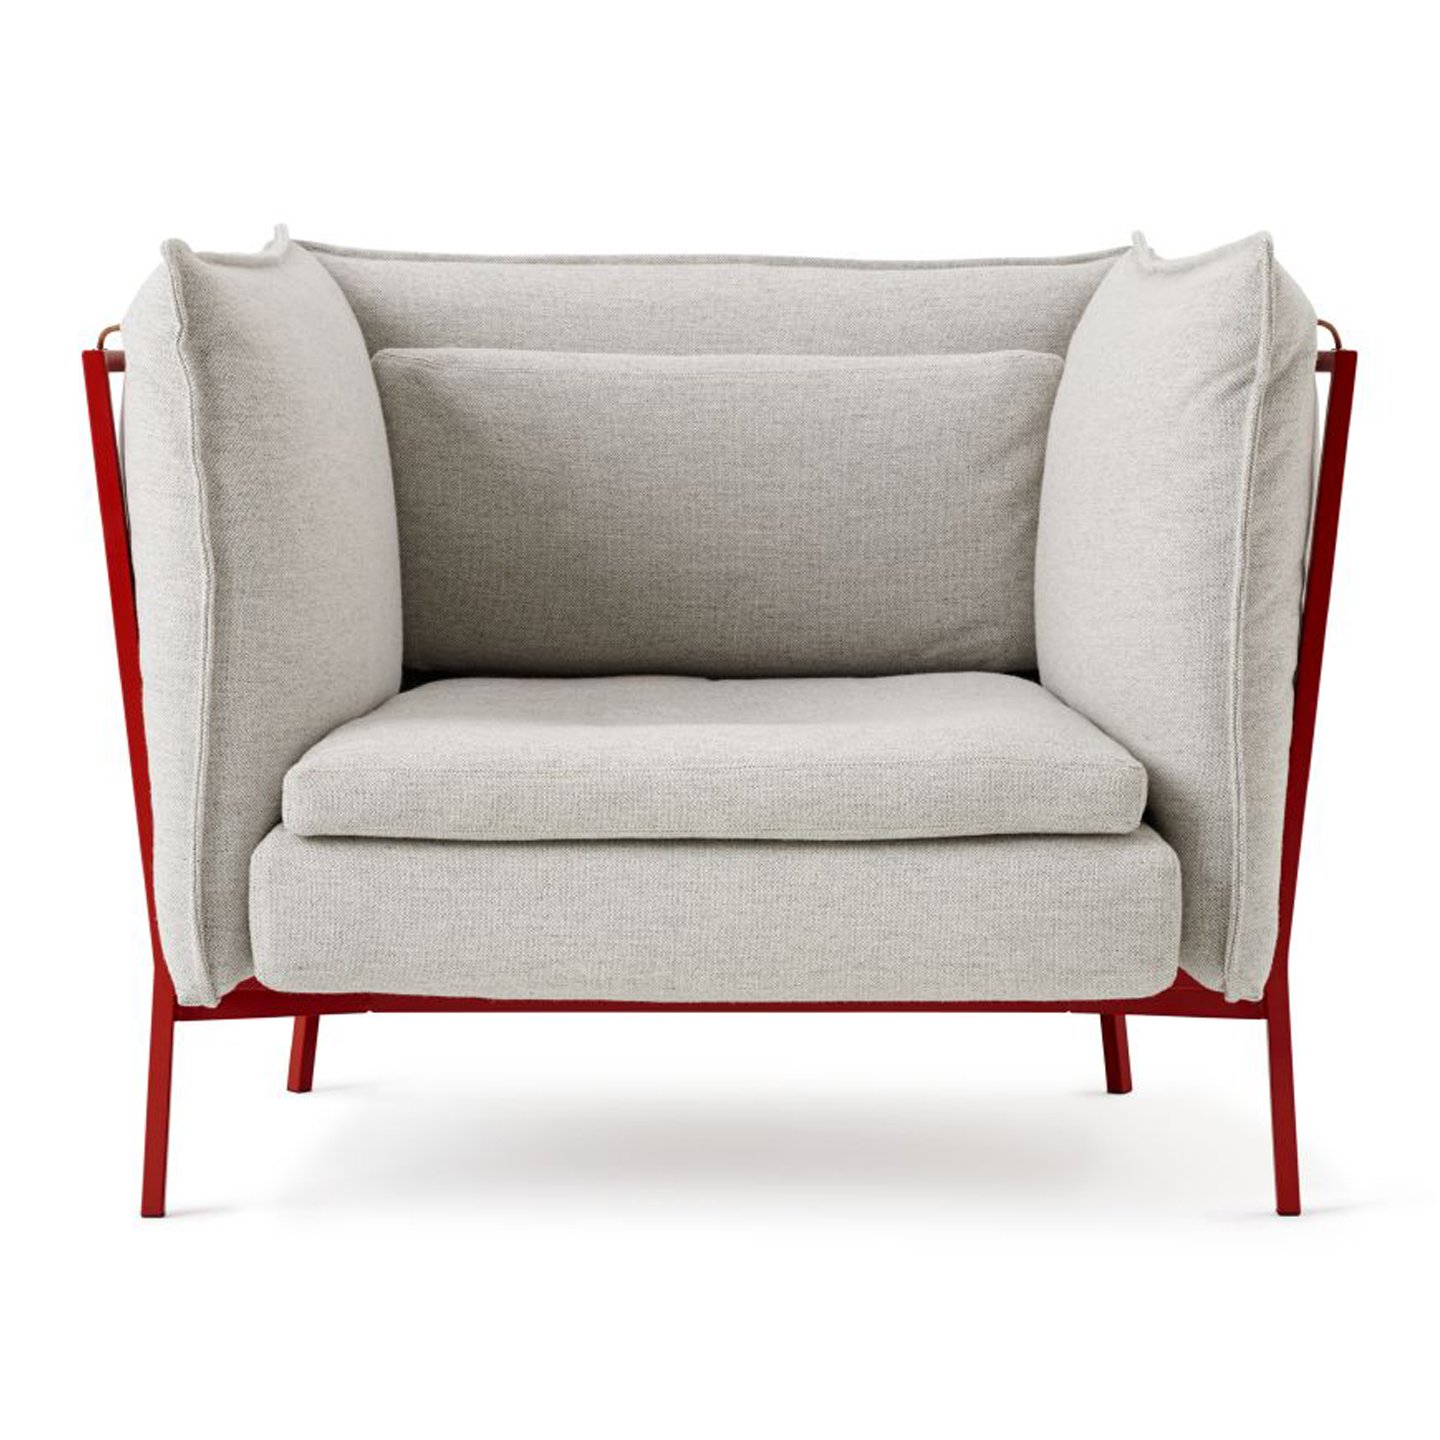 Haworth Basket 011 lounge chair in grey and red color